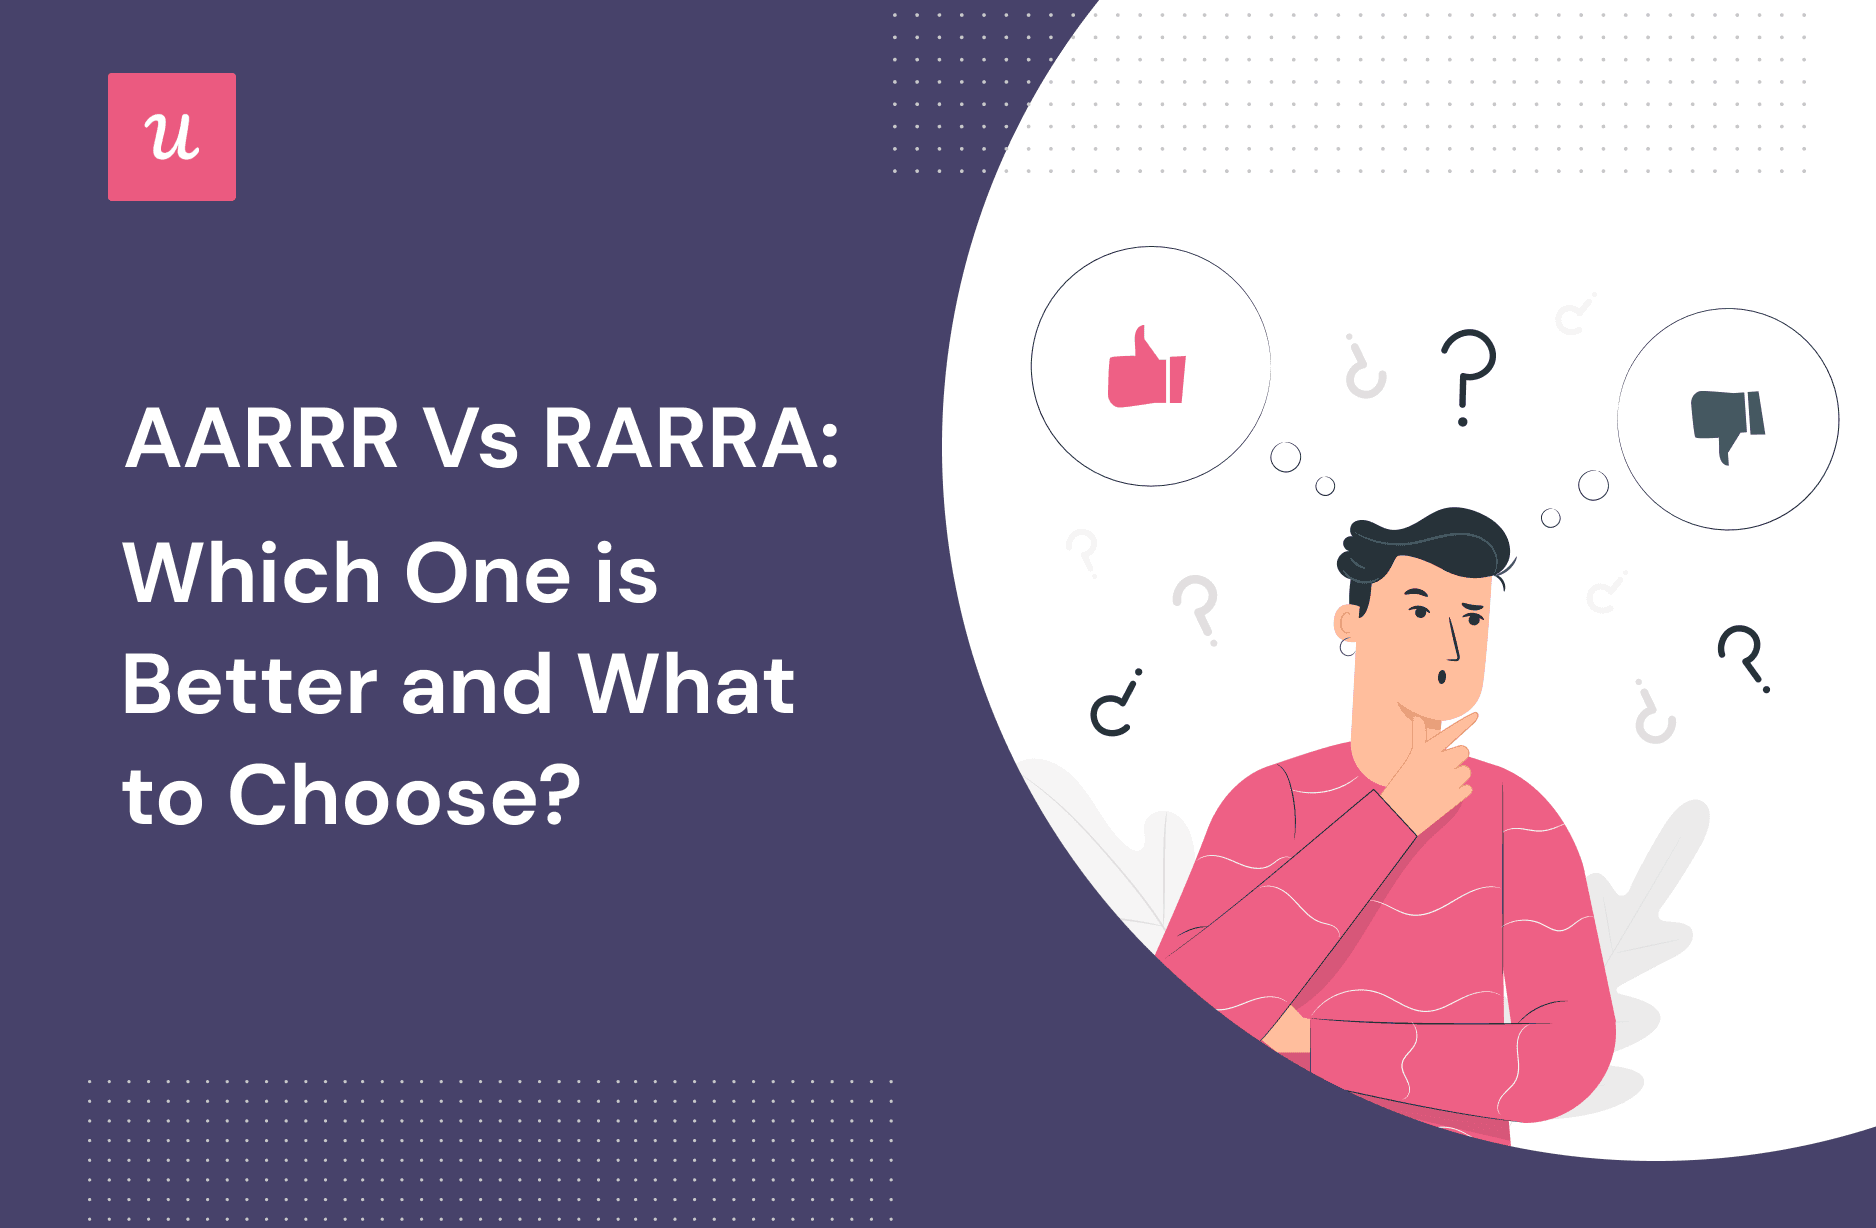 AARRR vs RARRA: Which one is better and what to choose?